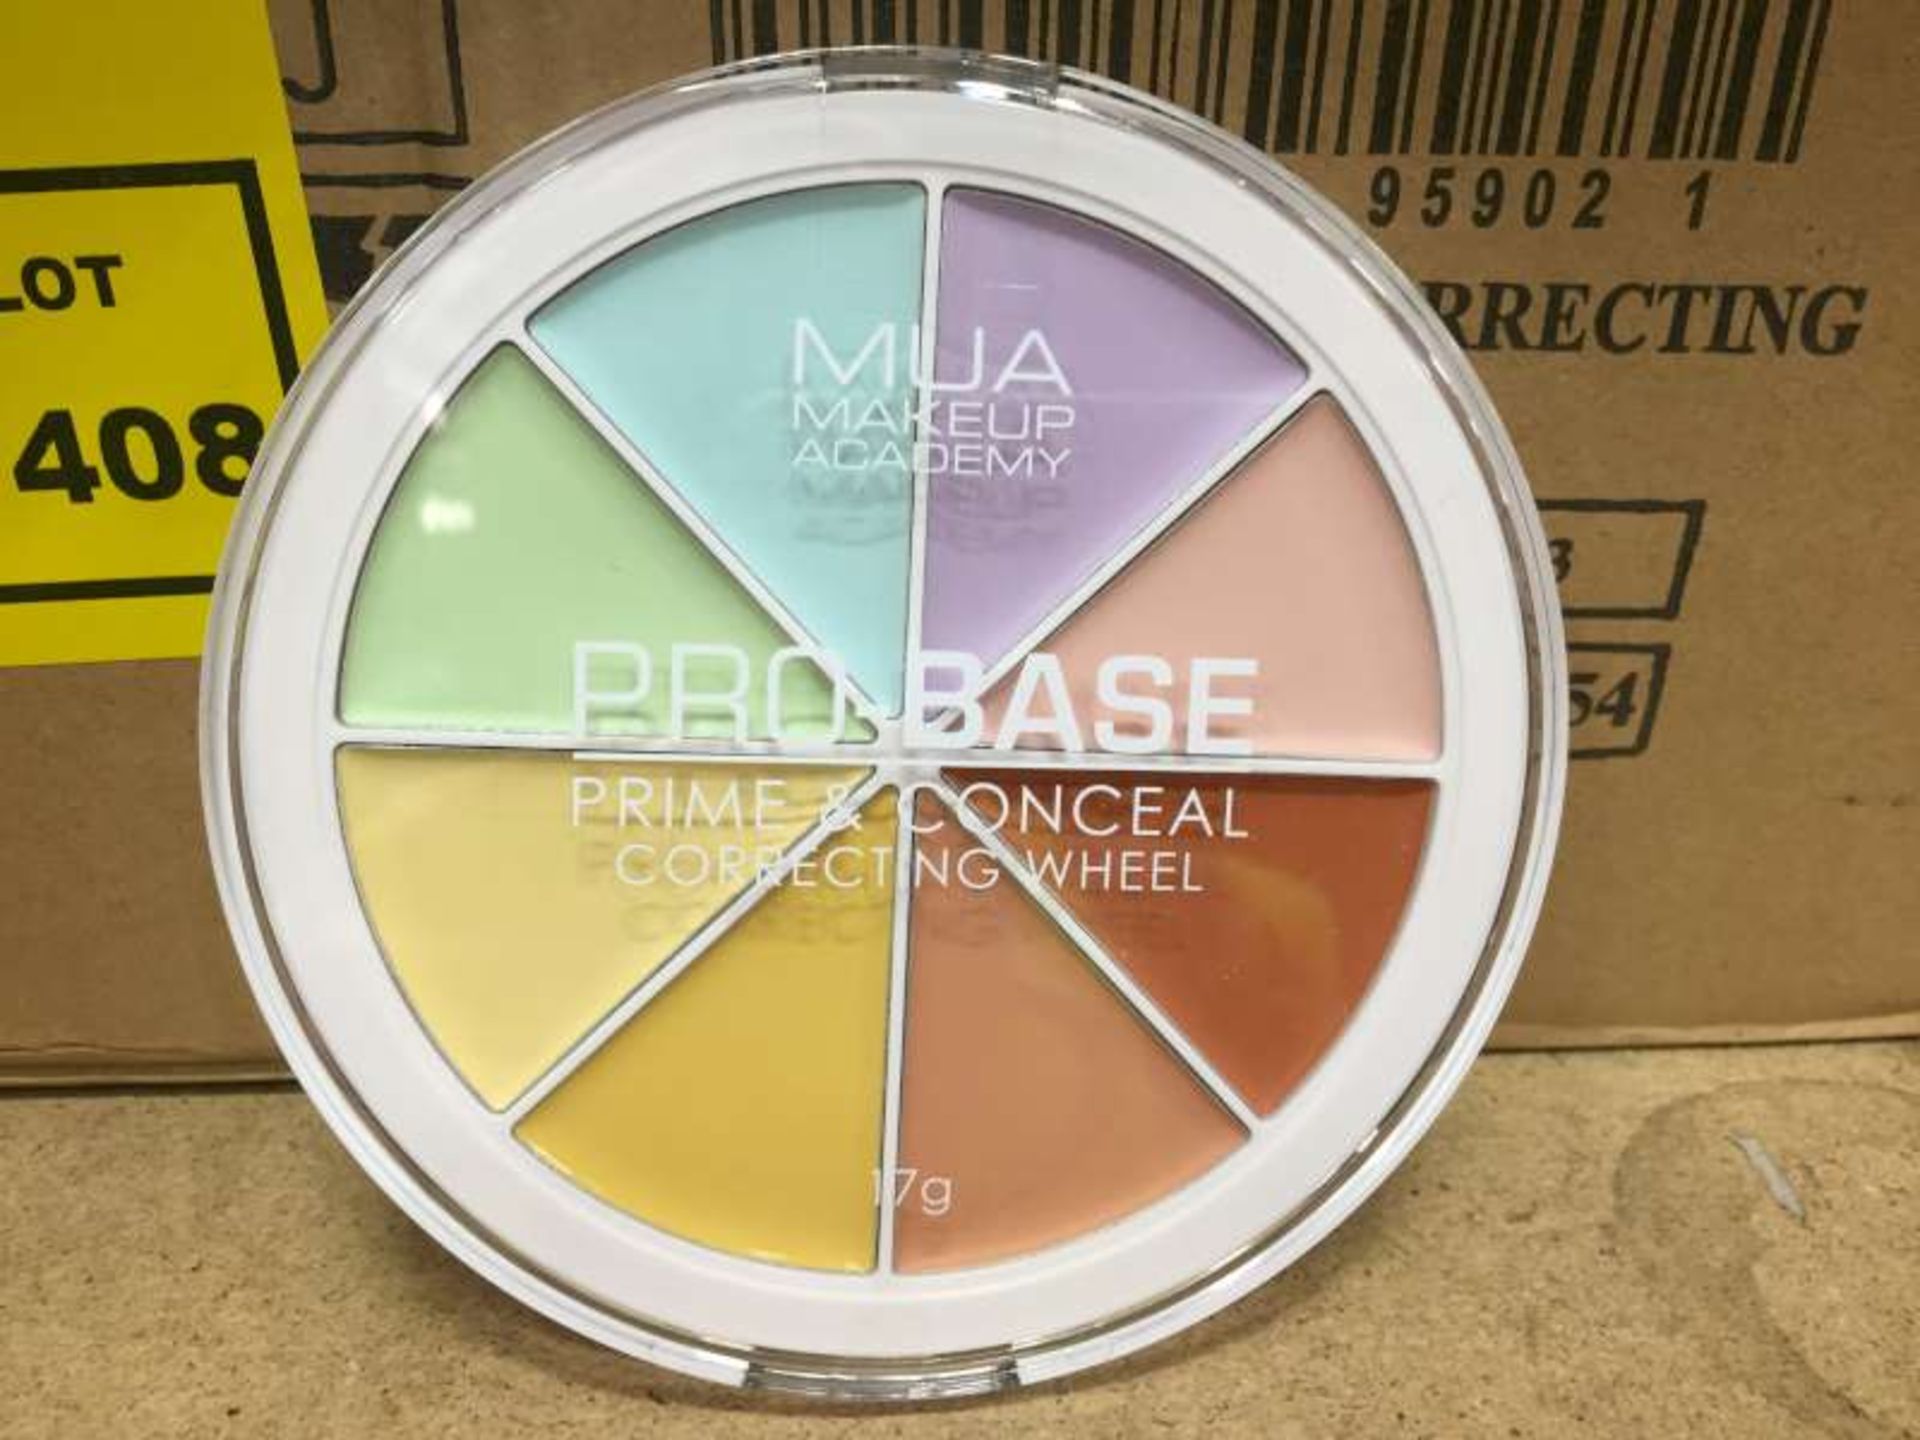 72 X MAKEUP ACADEMY PRO - BASE PRIME & CONCEAL CORRECTING WHEEL IN 1 BOX